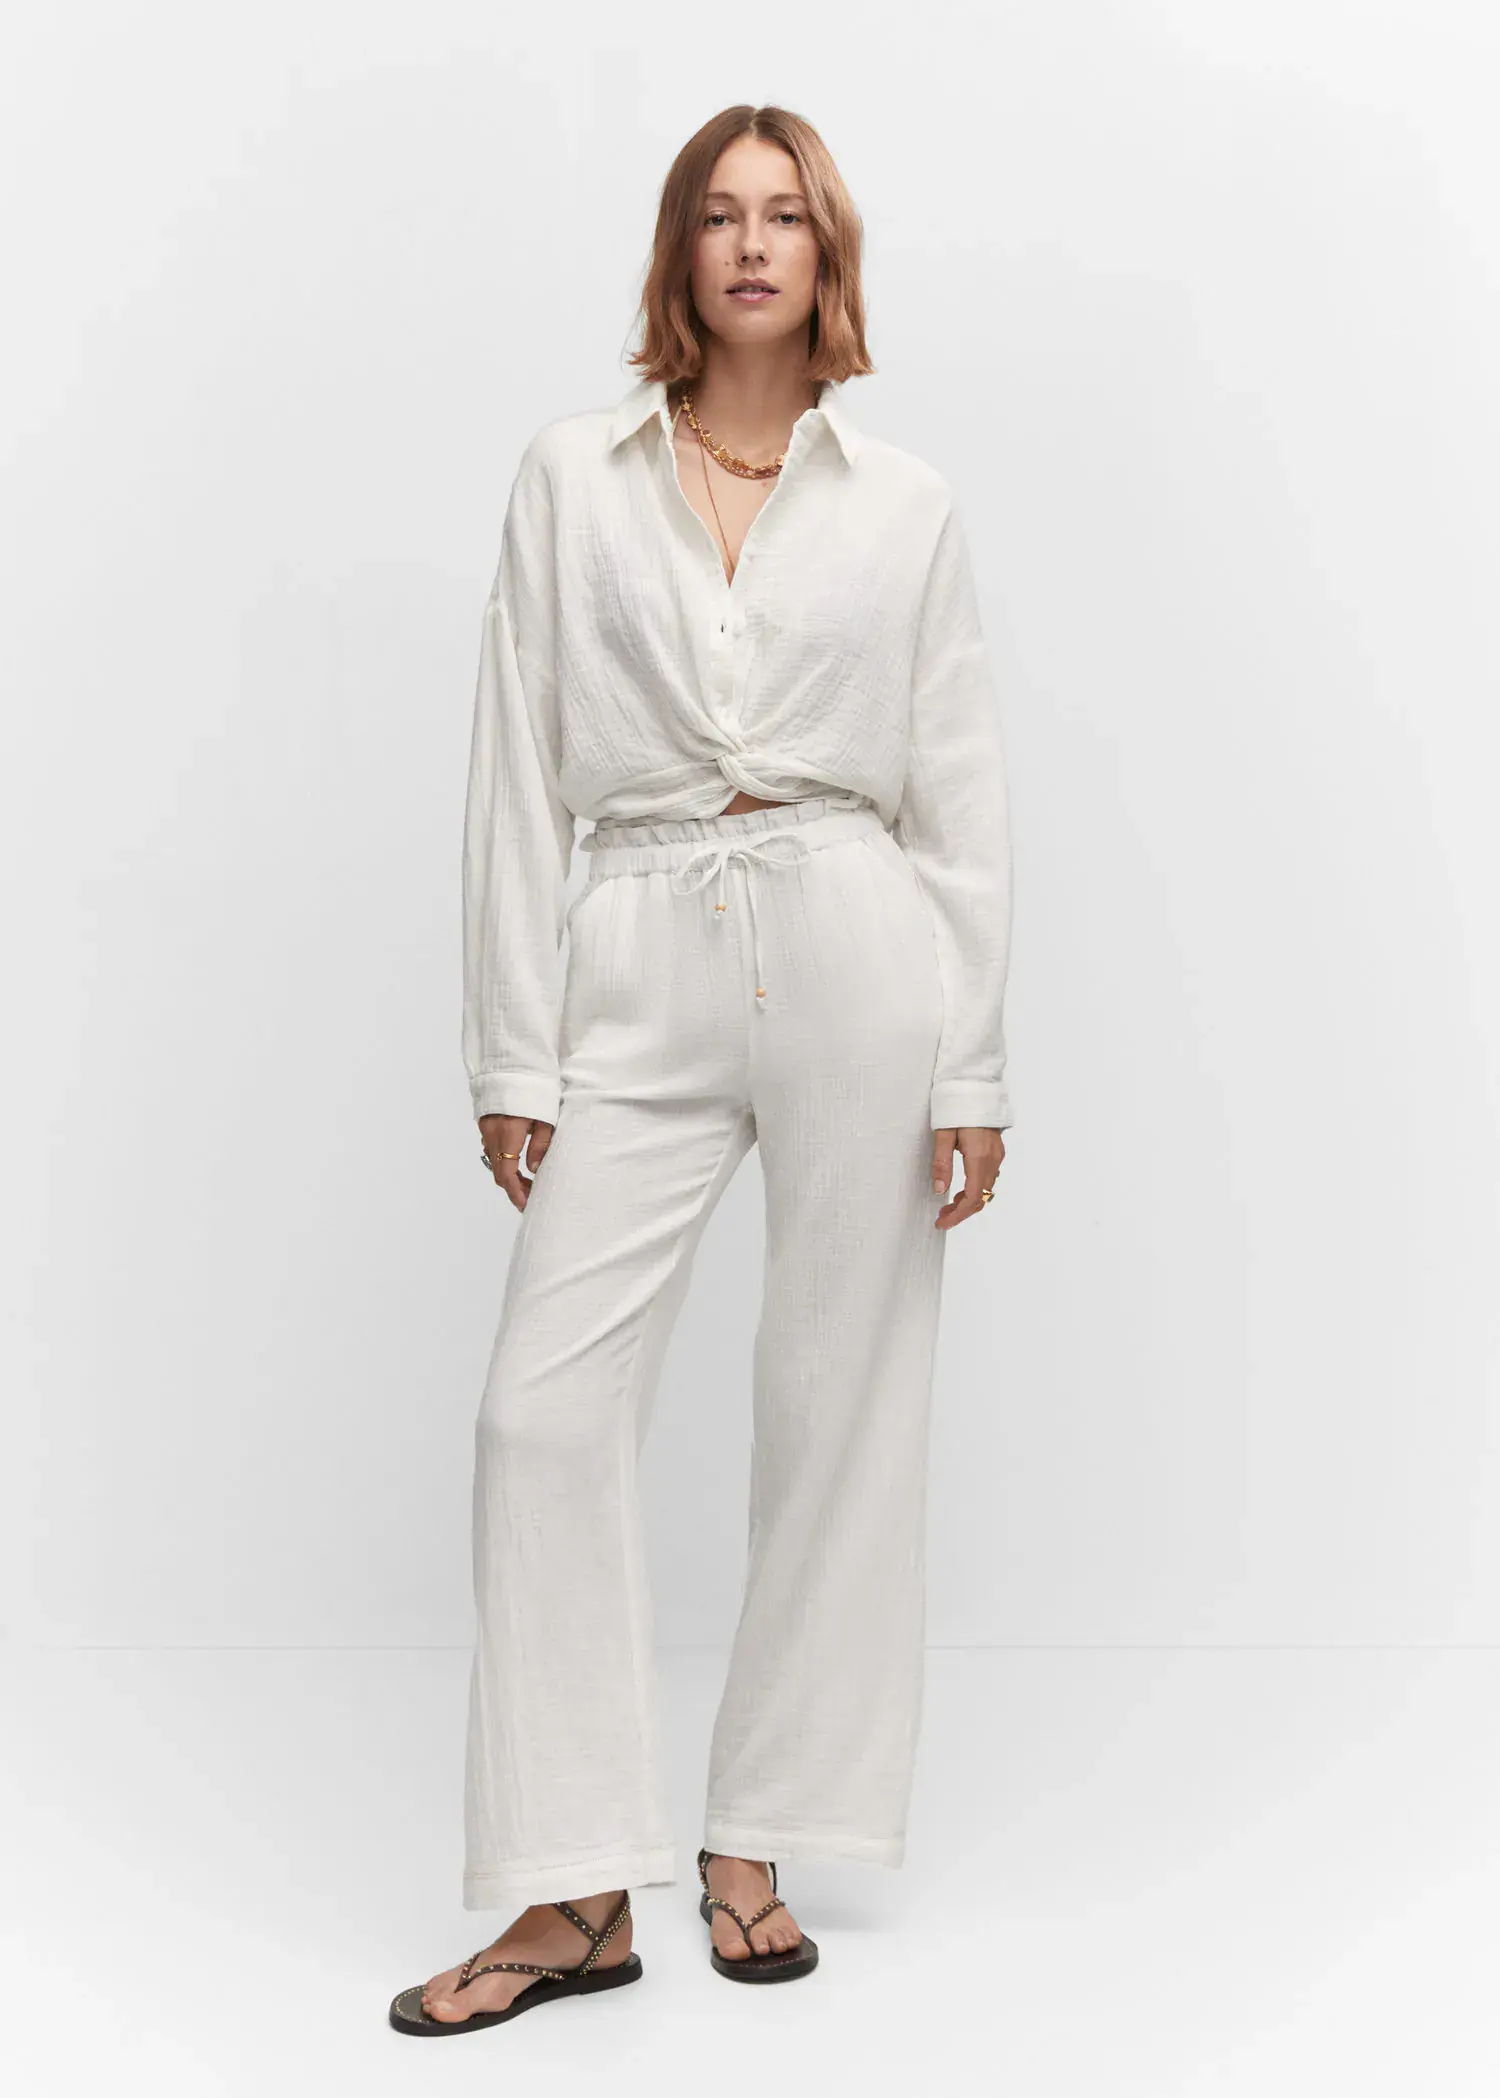 Mango Textured blouse with knot detail. a woman in a white outfit standing in front of a white wall. 